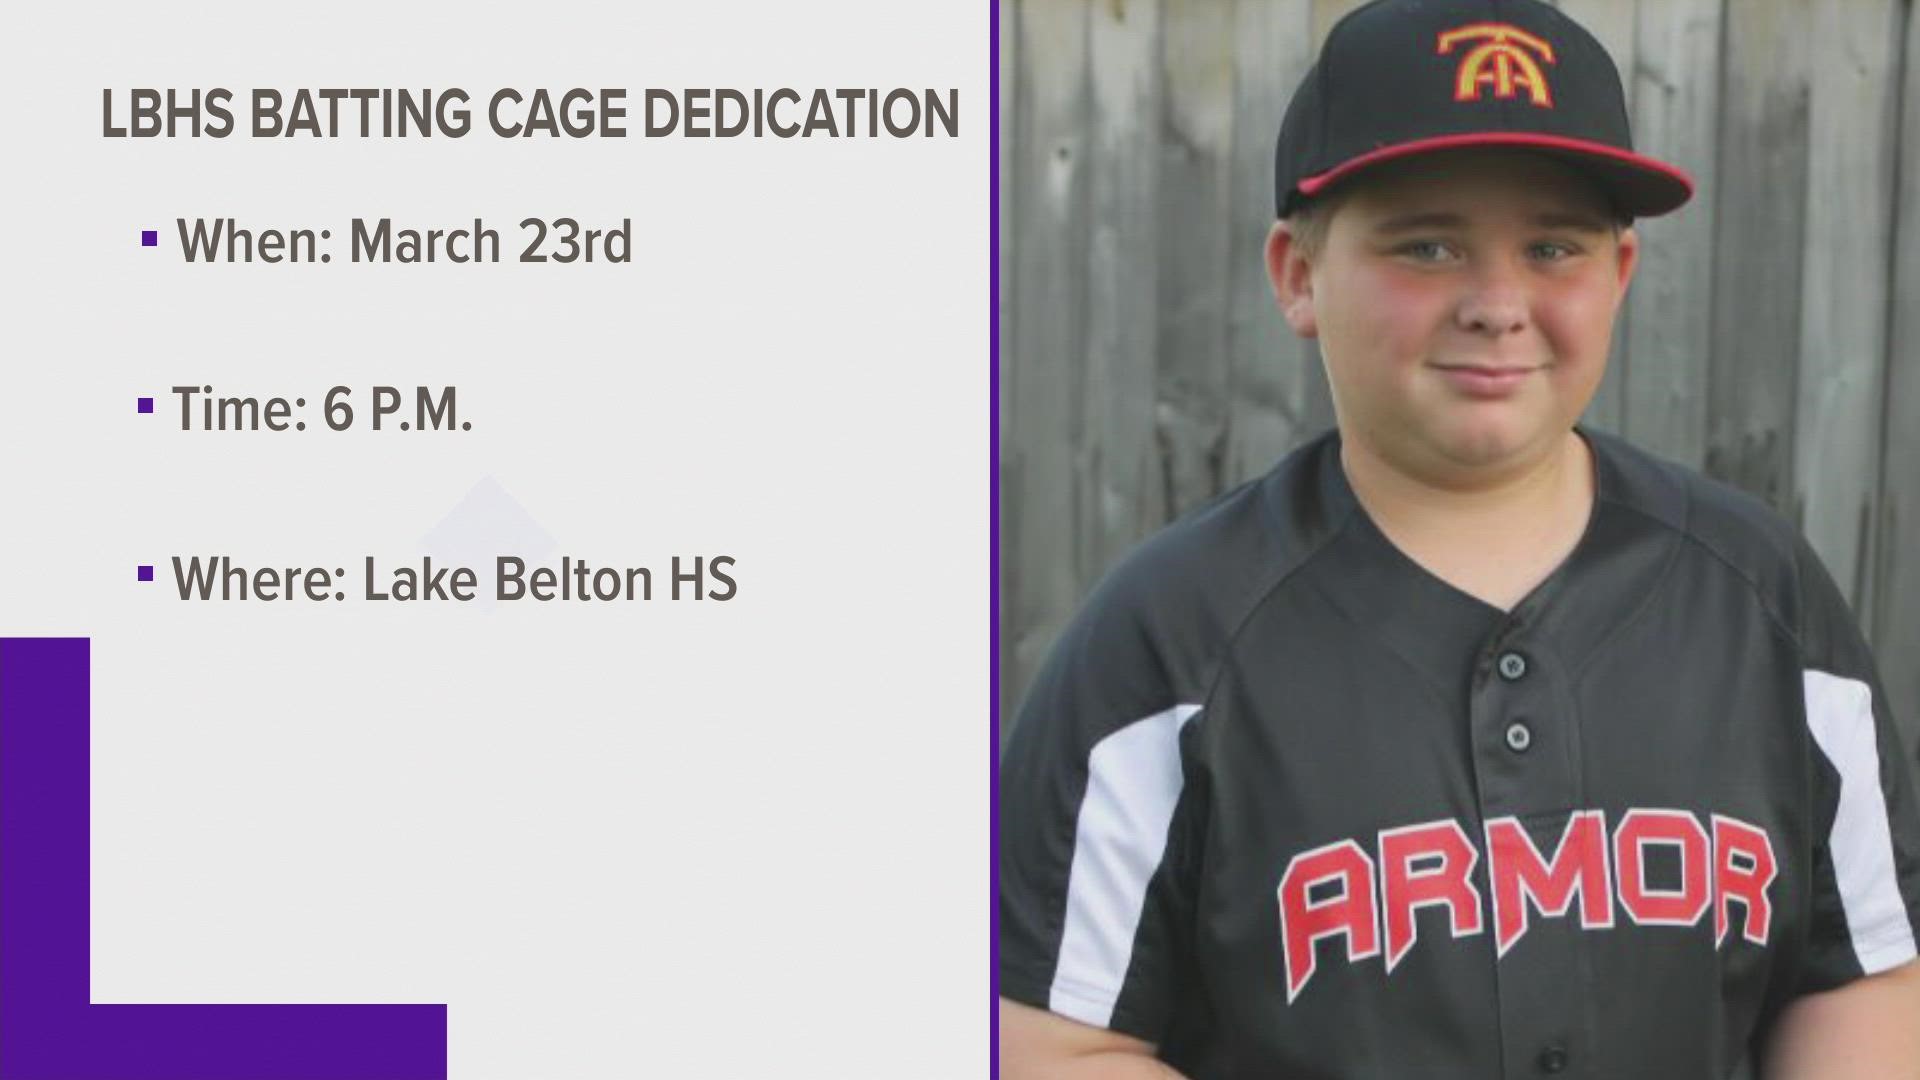 Jace Jefferson died in 2016. A dedication ceremony for the batting cages will be on March 23.